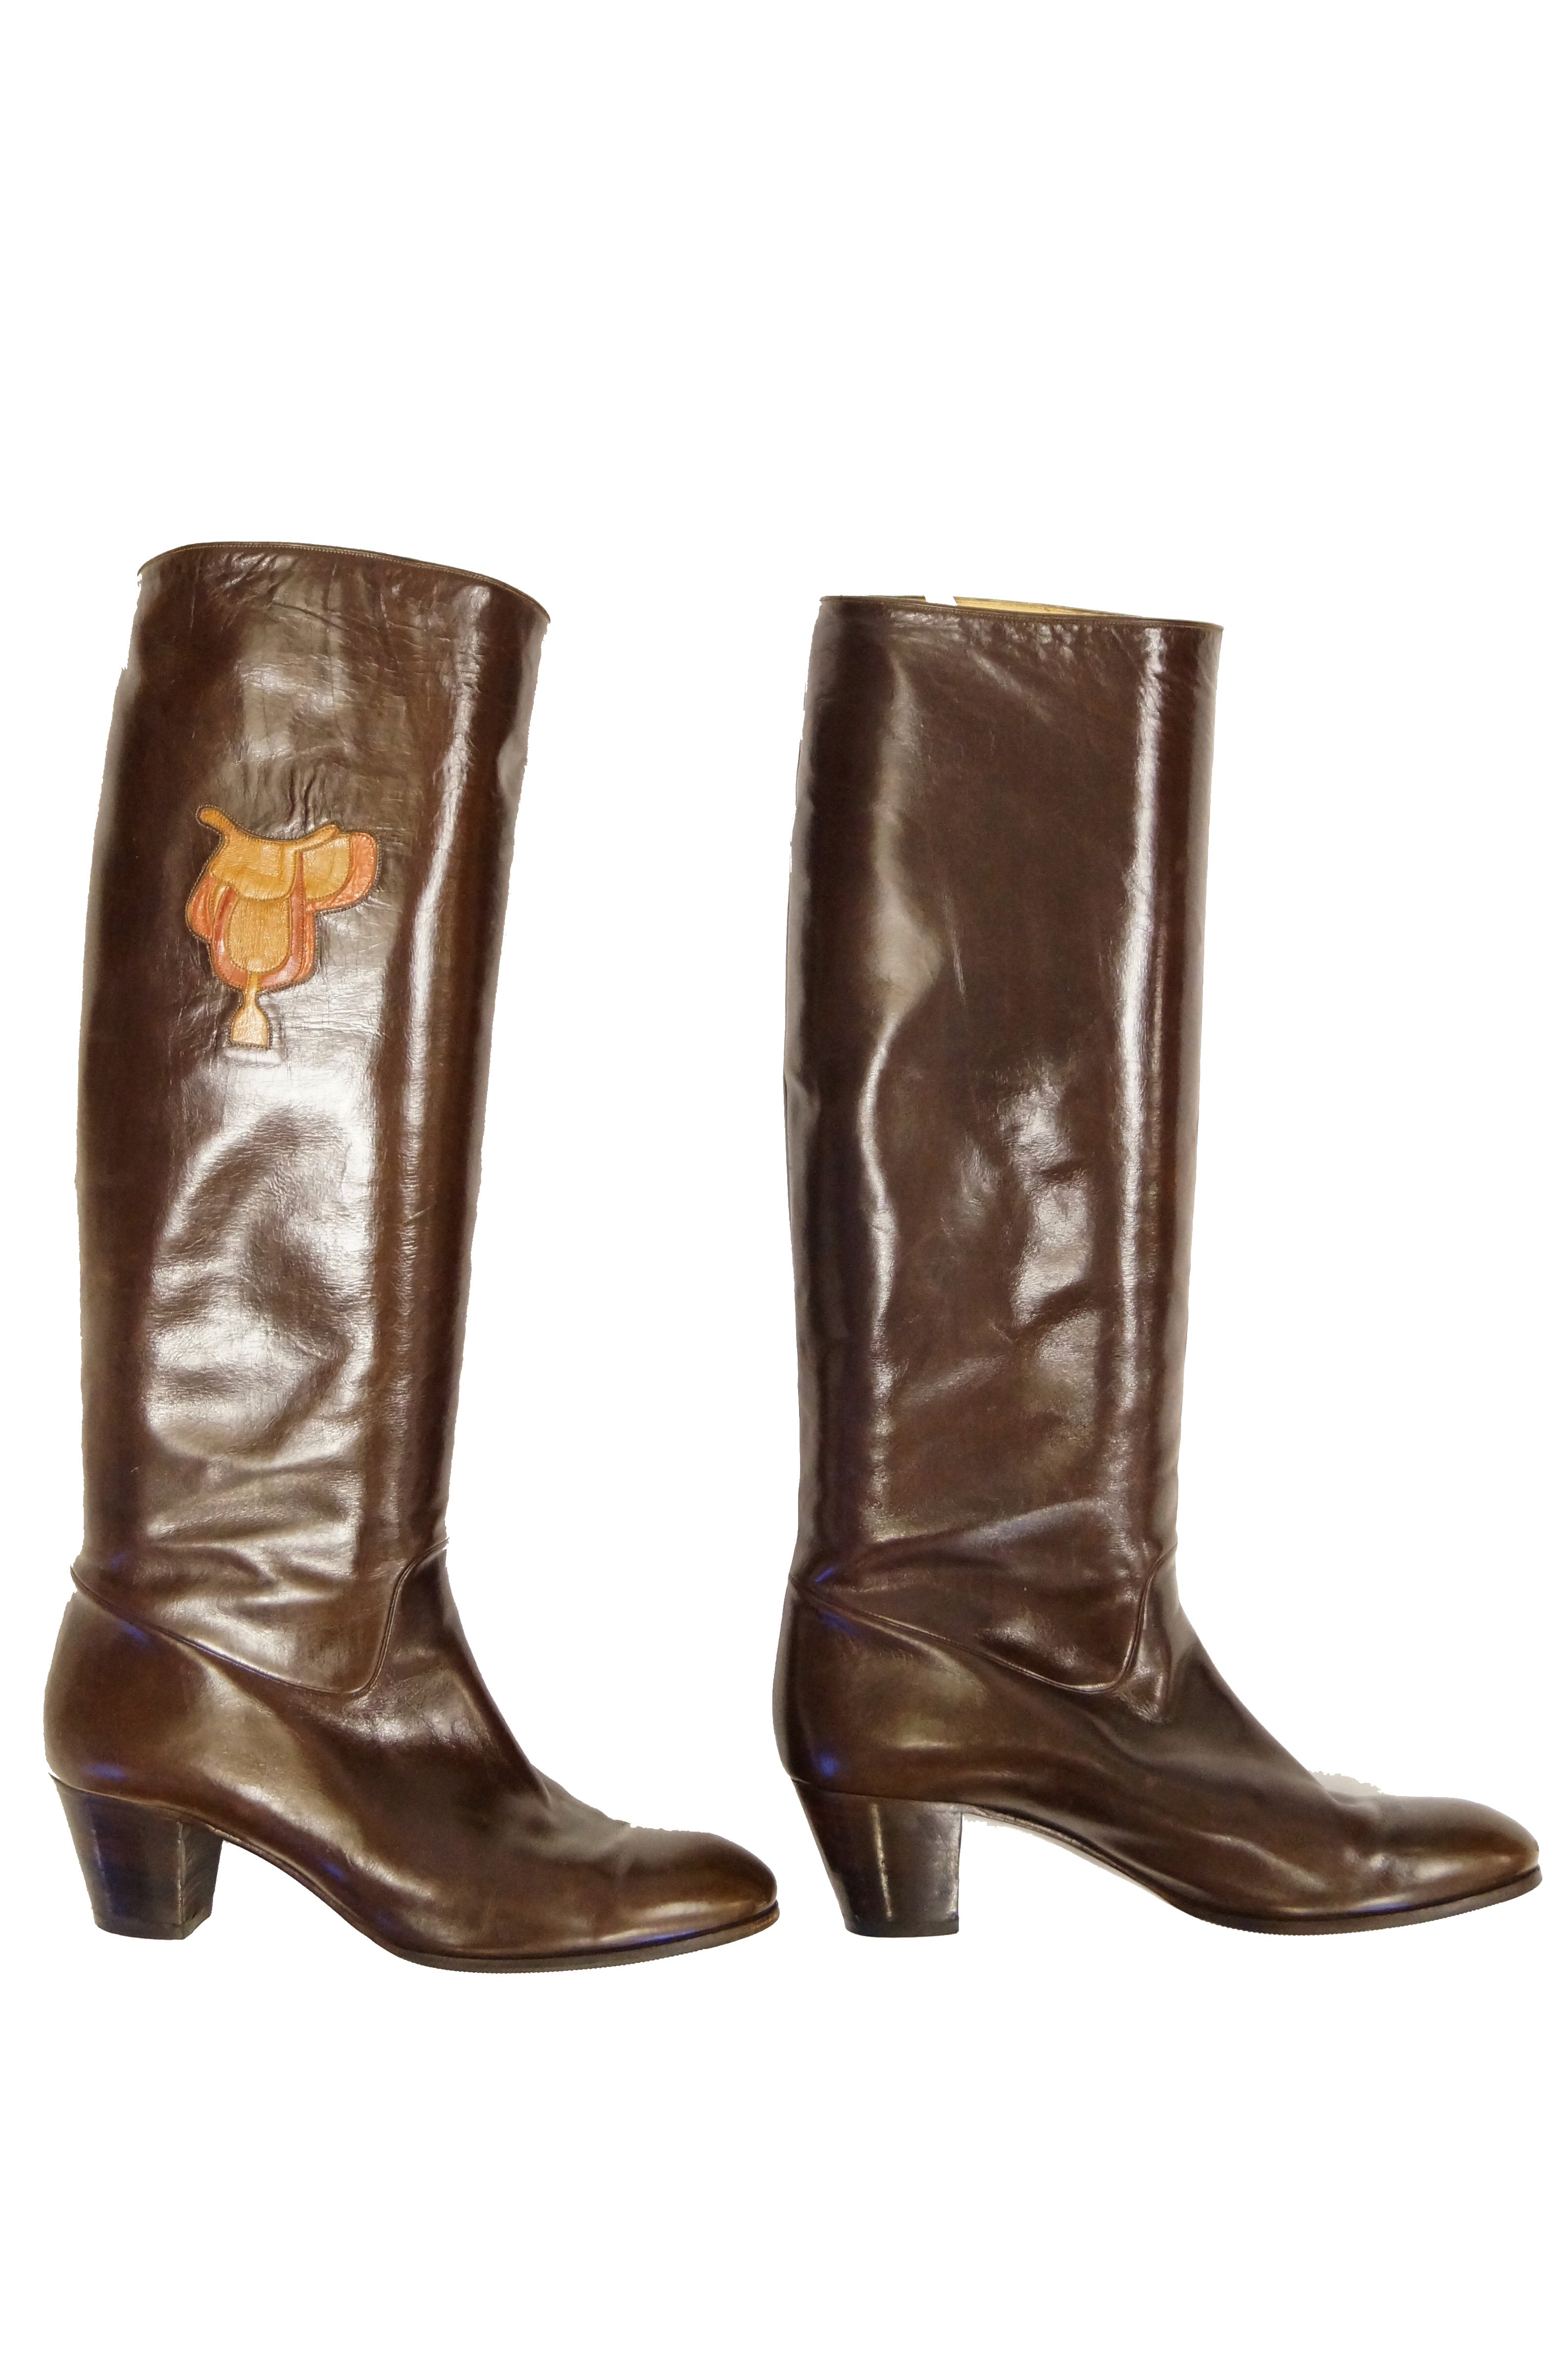 1980s Gucci Black Leather Equestrian Saddle Boots - MRS Couture